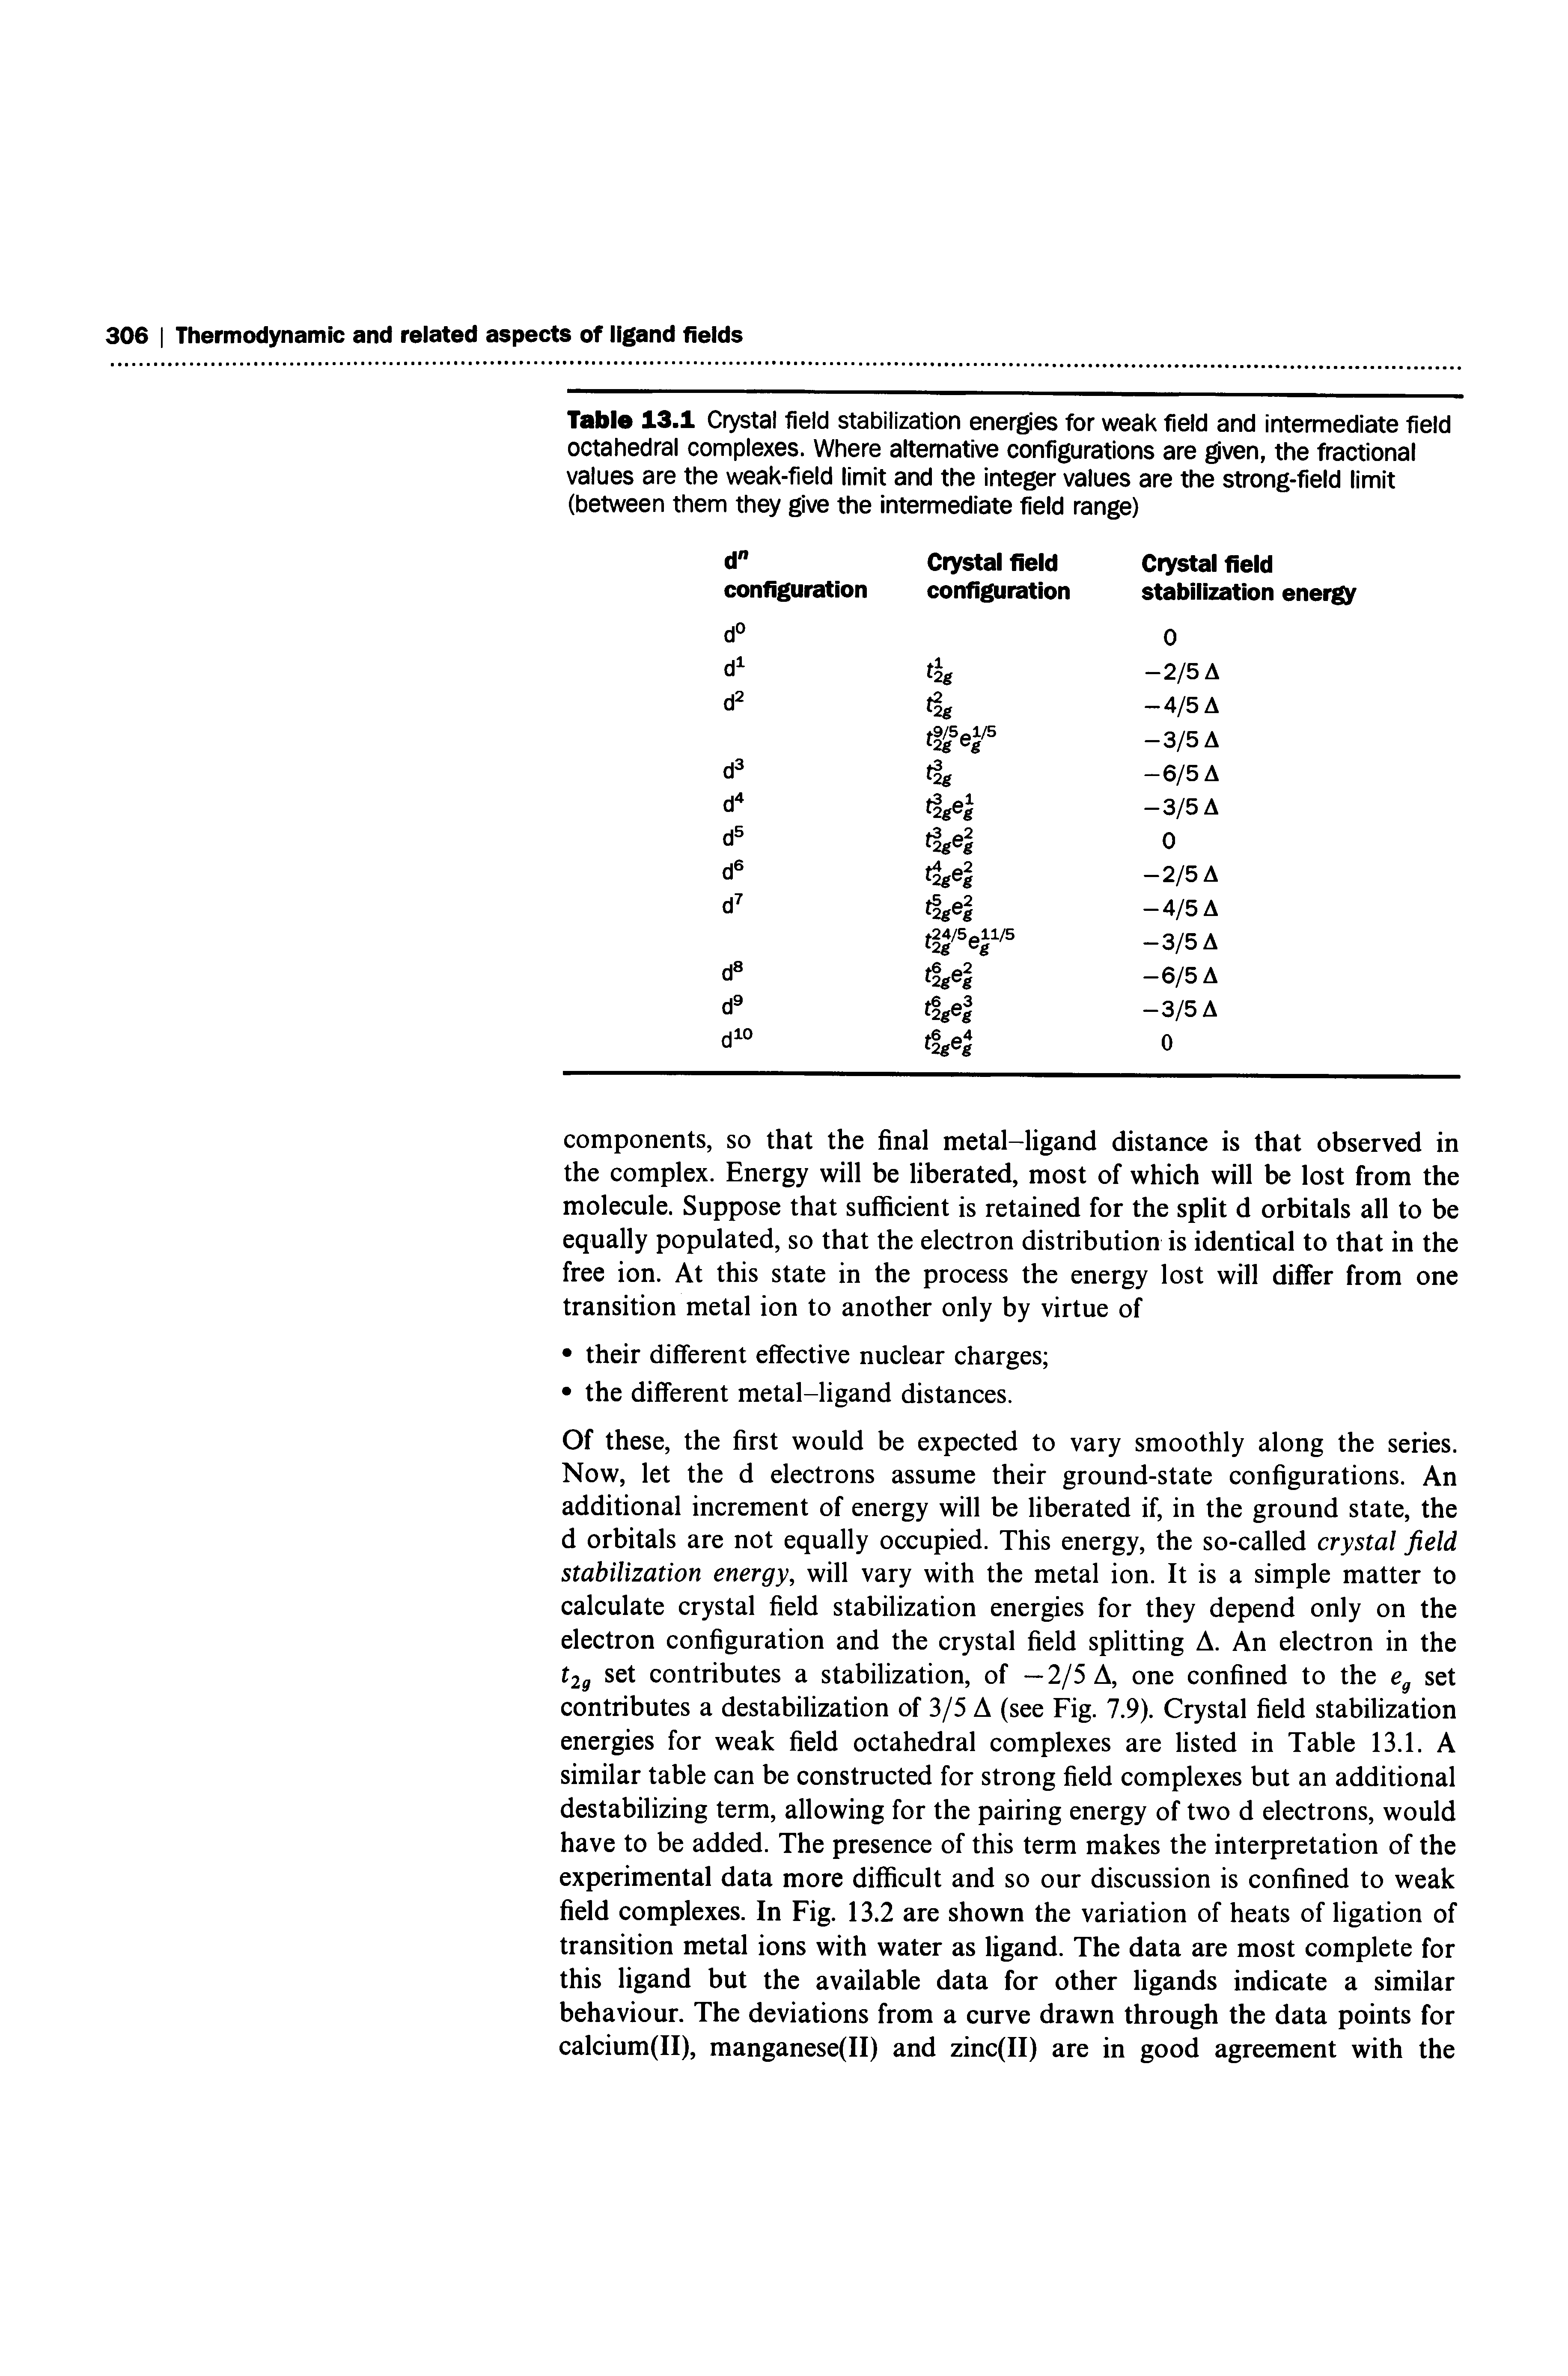 Table 13.1 Crystal field stabilization energies for weak field and intermediate field octahedral complexes. Where alternative configurations are given, the fractional values are the weak-field limit and the integer values are the strong-field limit (between them they give the intermediate field range)...